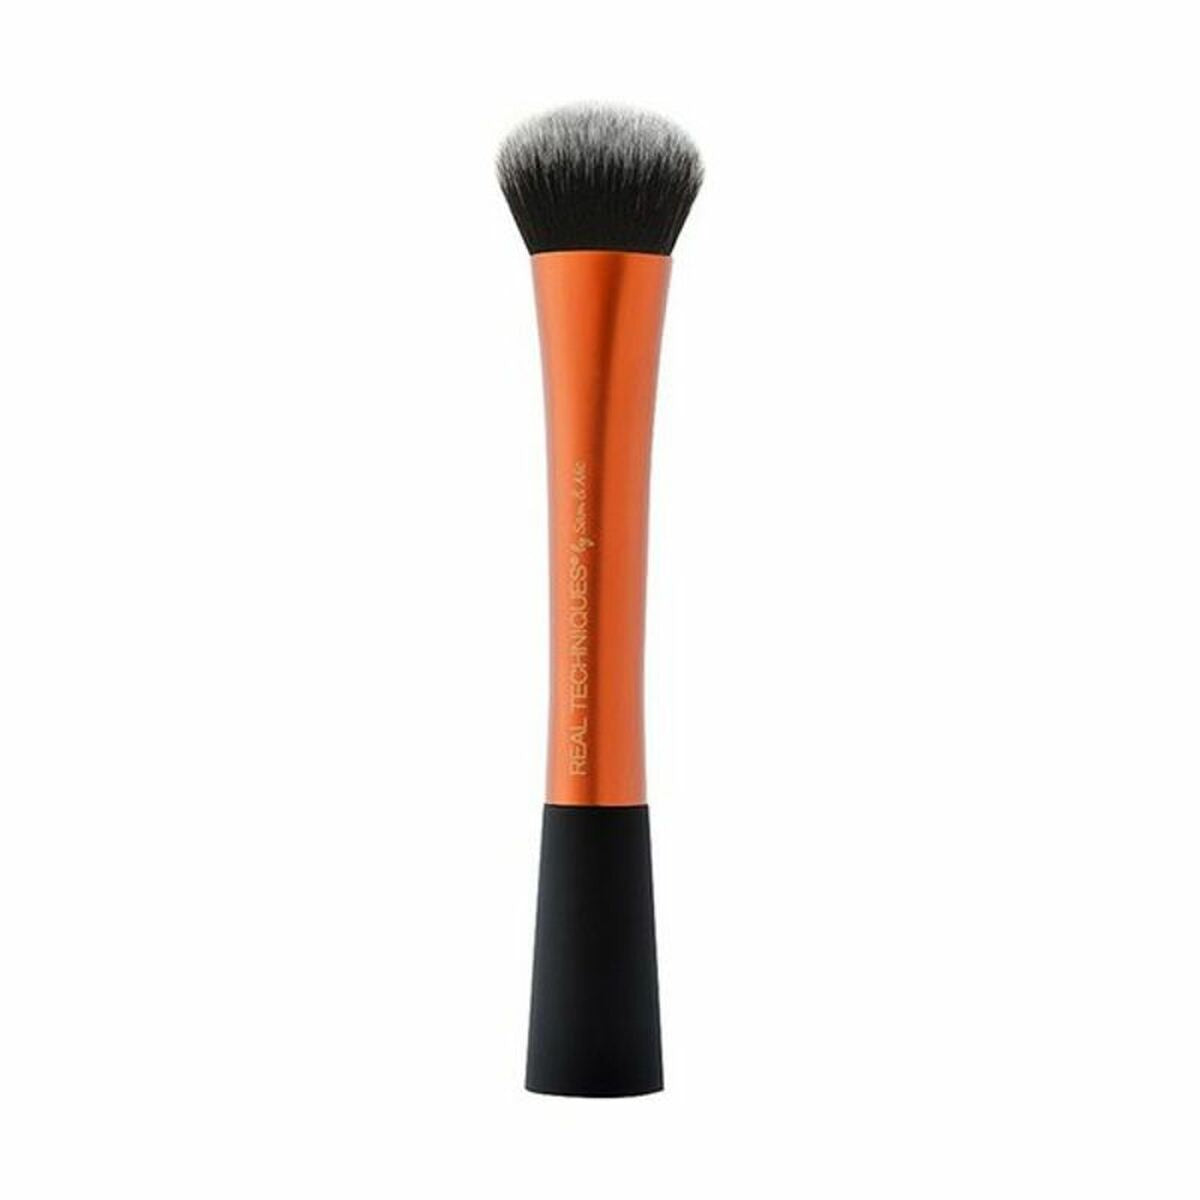 Make-up Brush Expert Face Real Techniques 1411-0